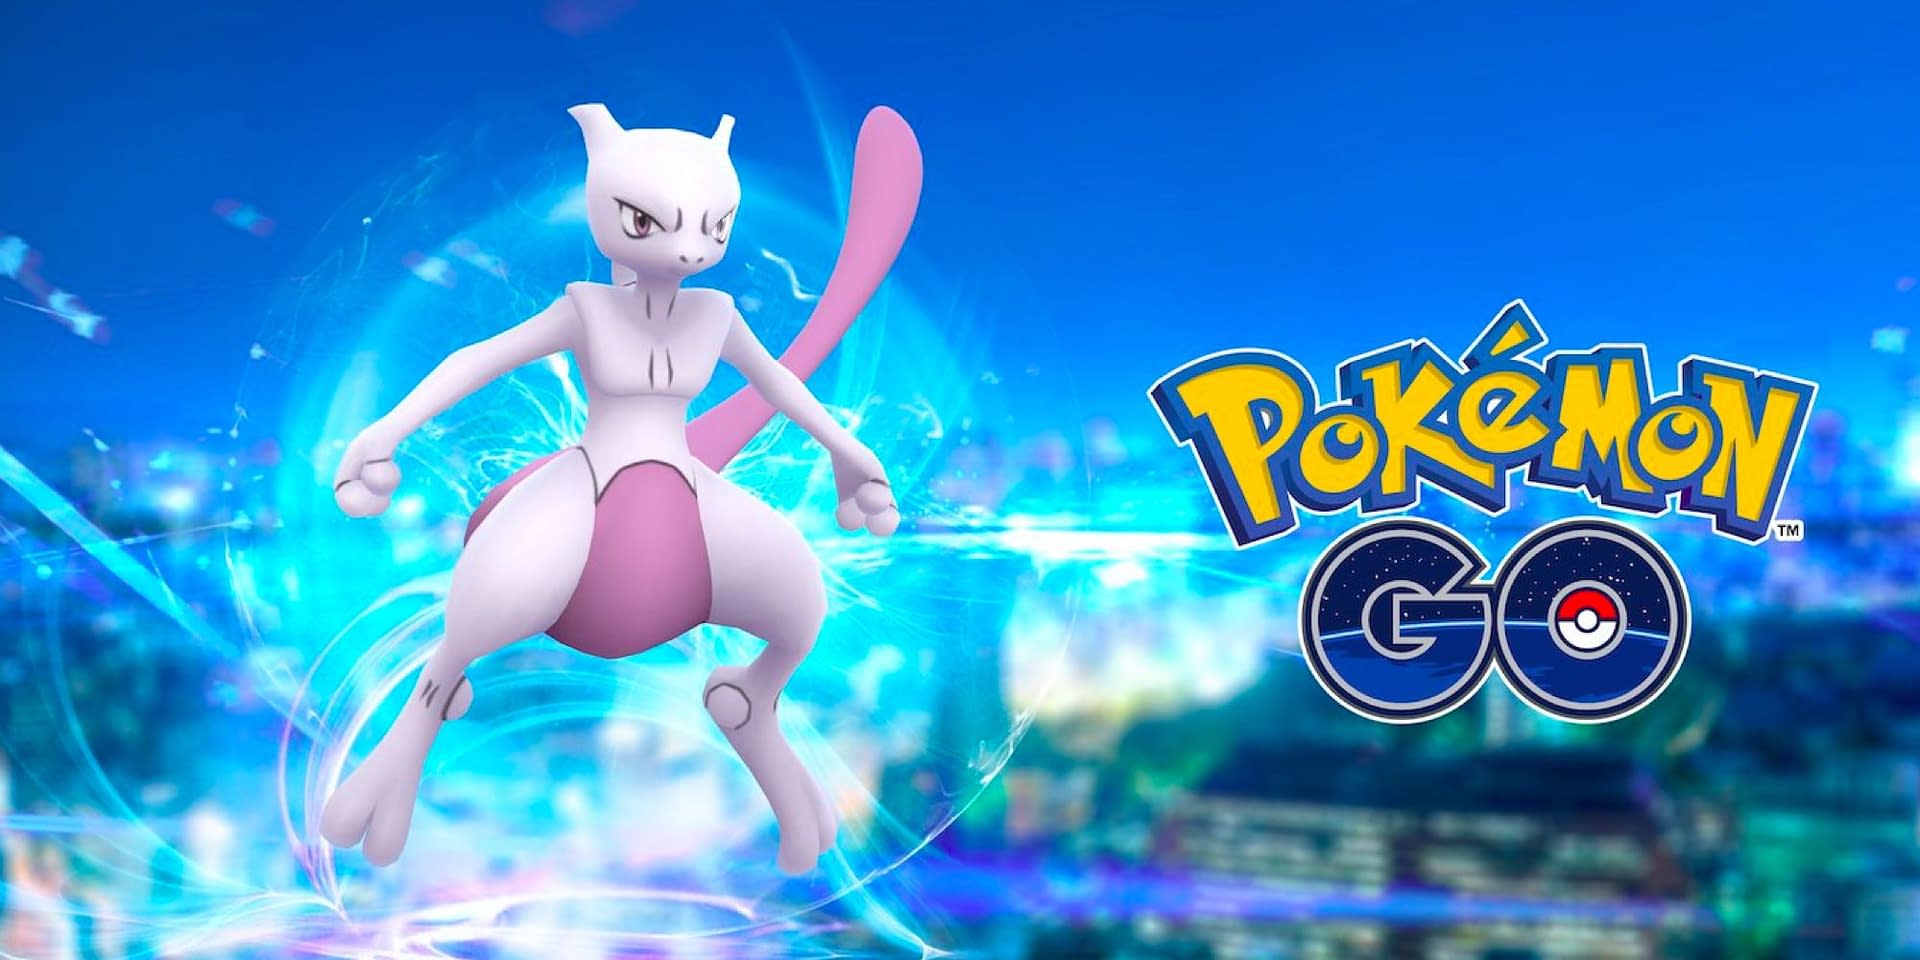 Pokemon Go : Armored Mewtwo coming to raids, Raid Guide & Best